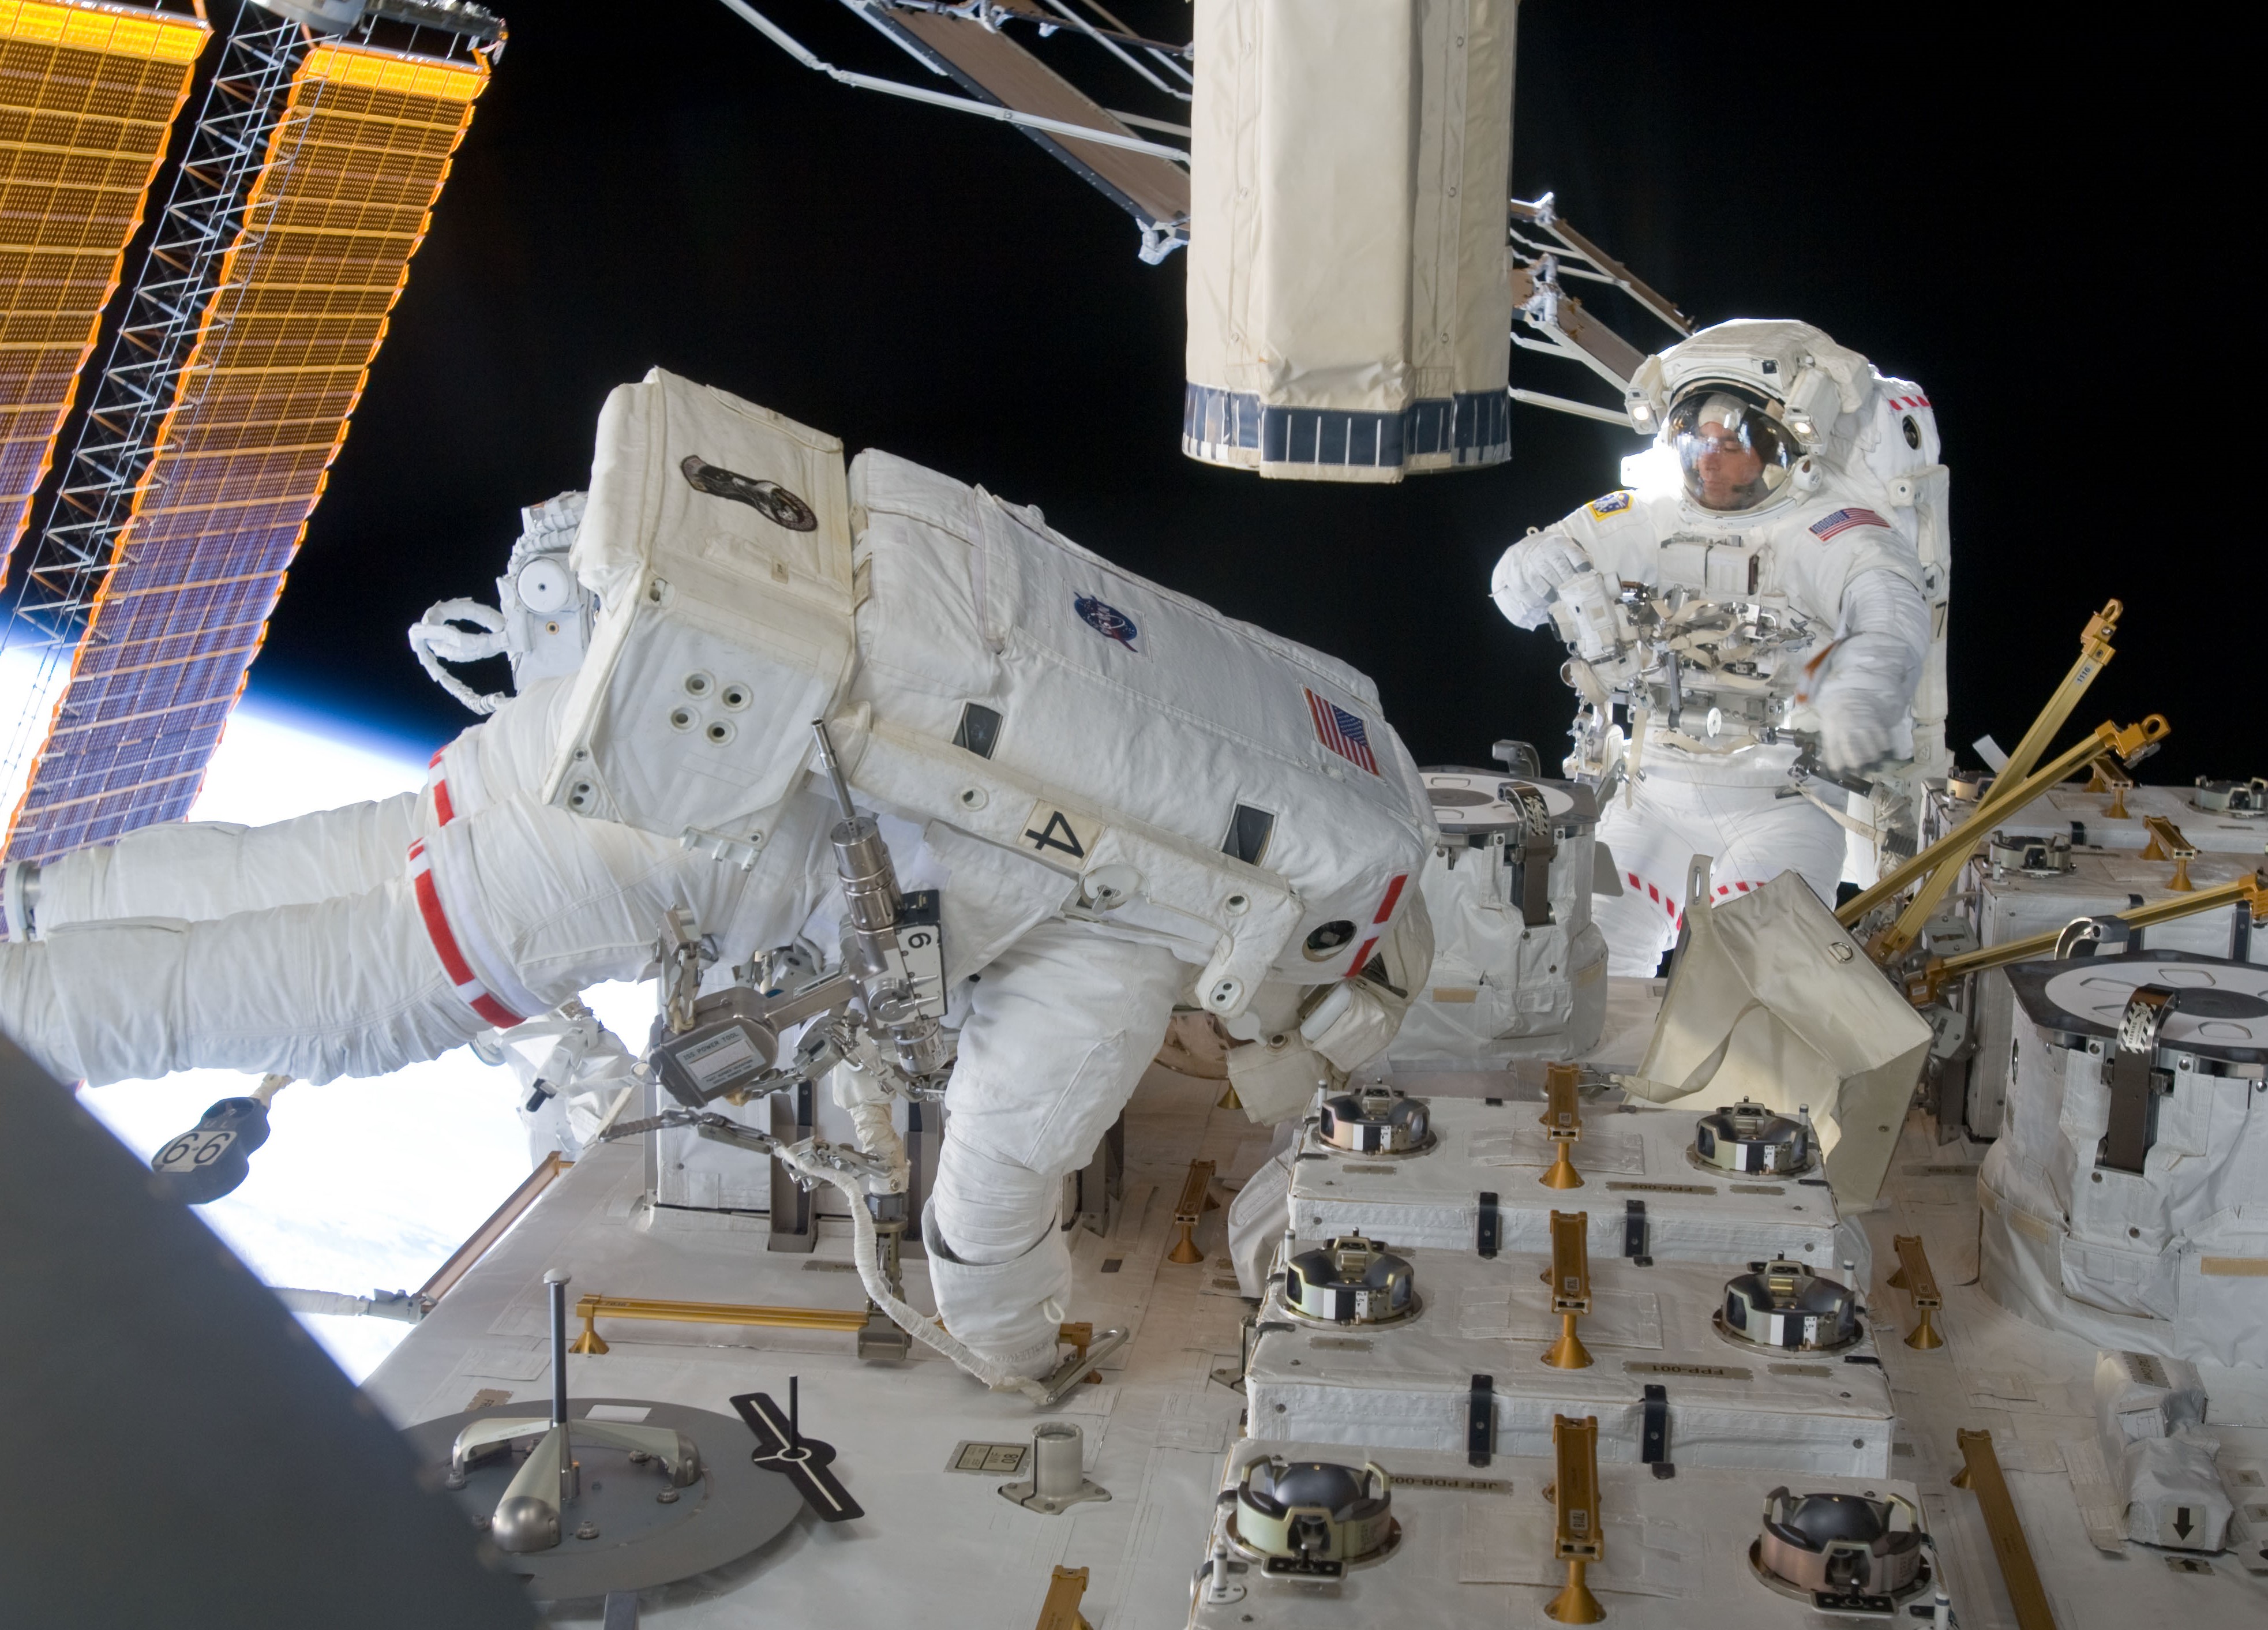 Marshburn, left, and Cassidy install cameras on the Kibo Exposed Facility during the fifth and final spacewalk